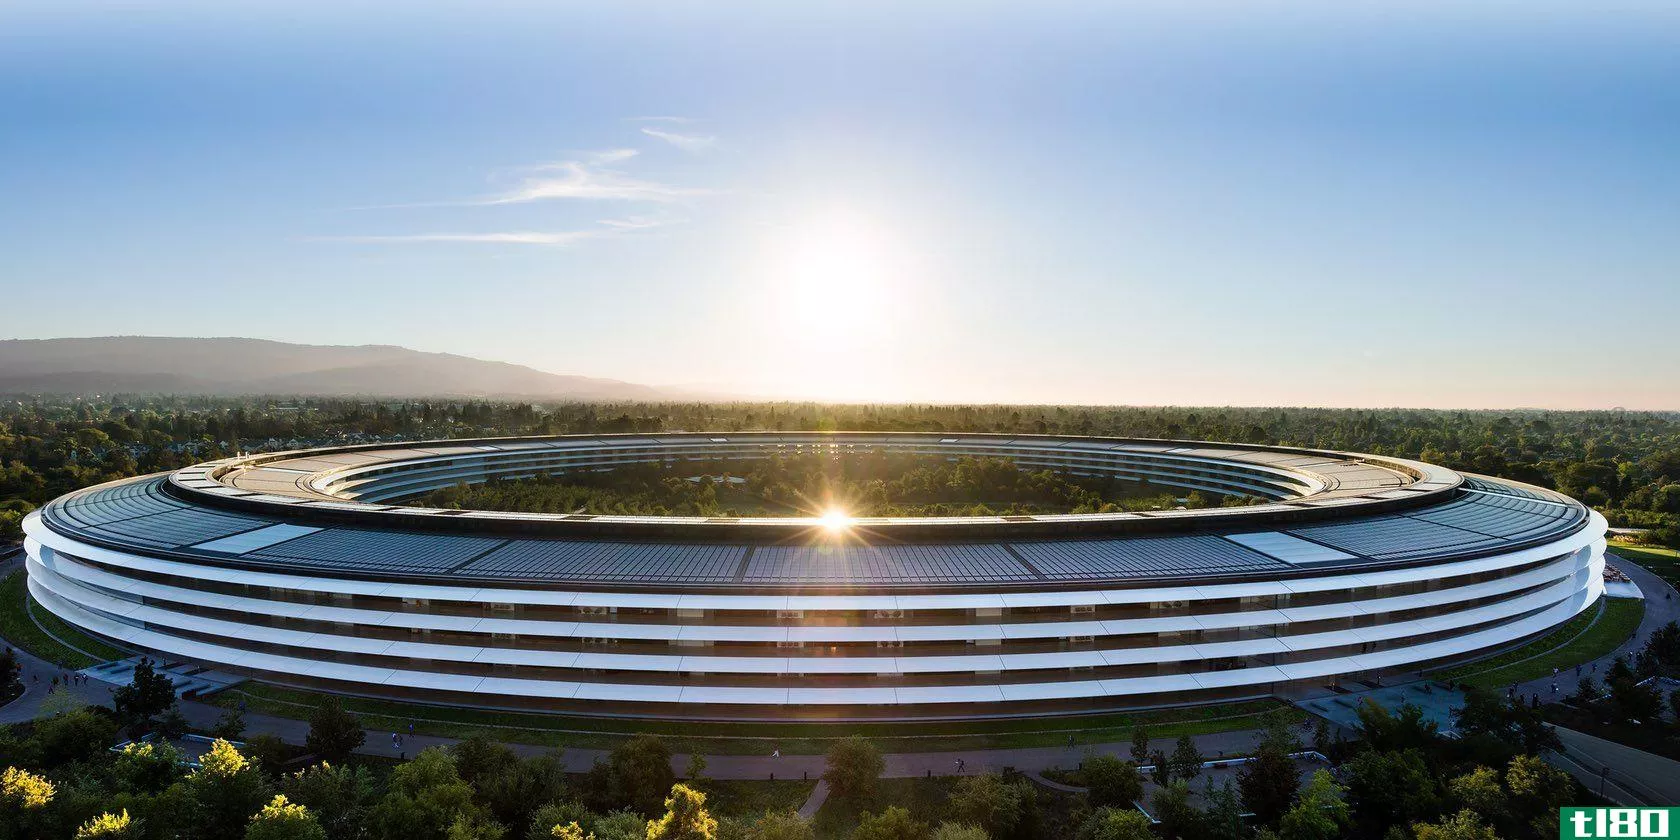 A still photograph captured by a drone showing an aerial view of the Apple Park headquarters in Cupertino, California